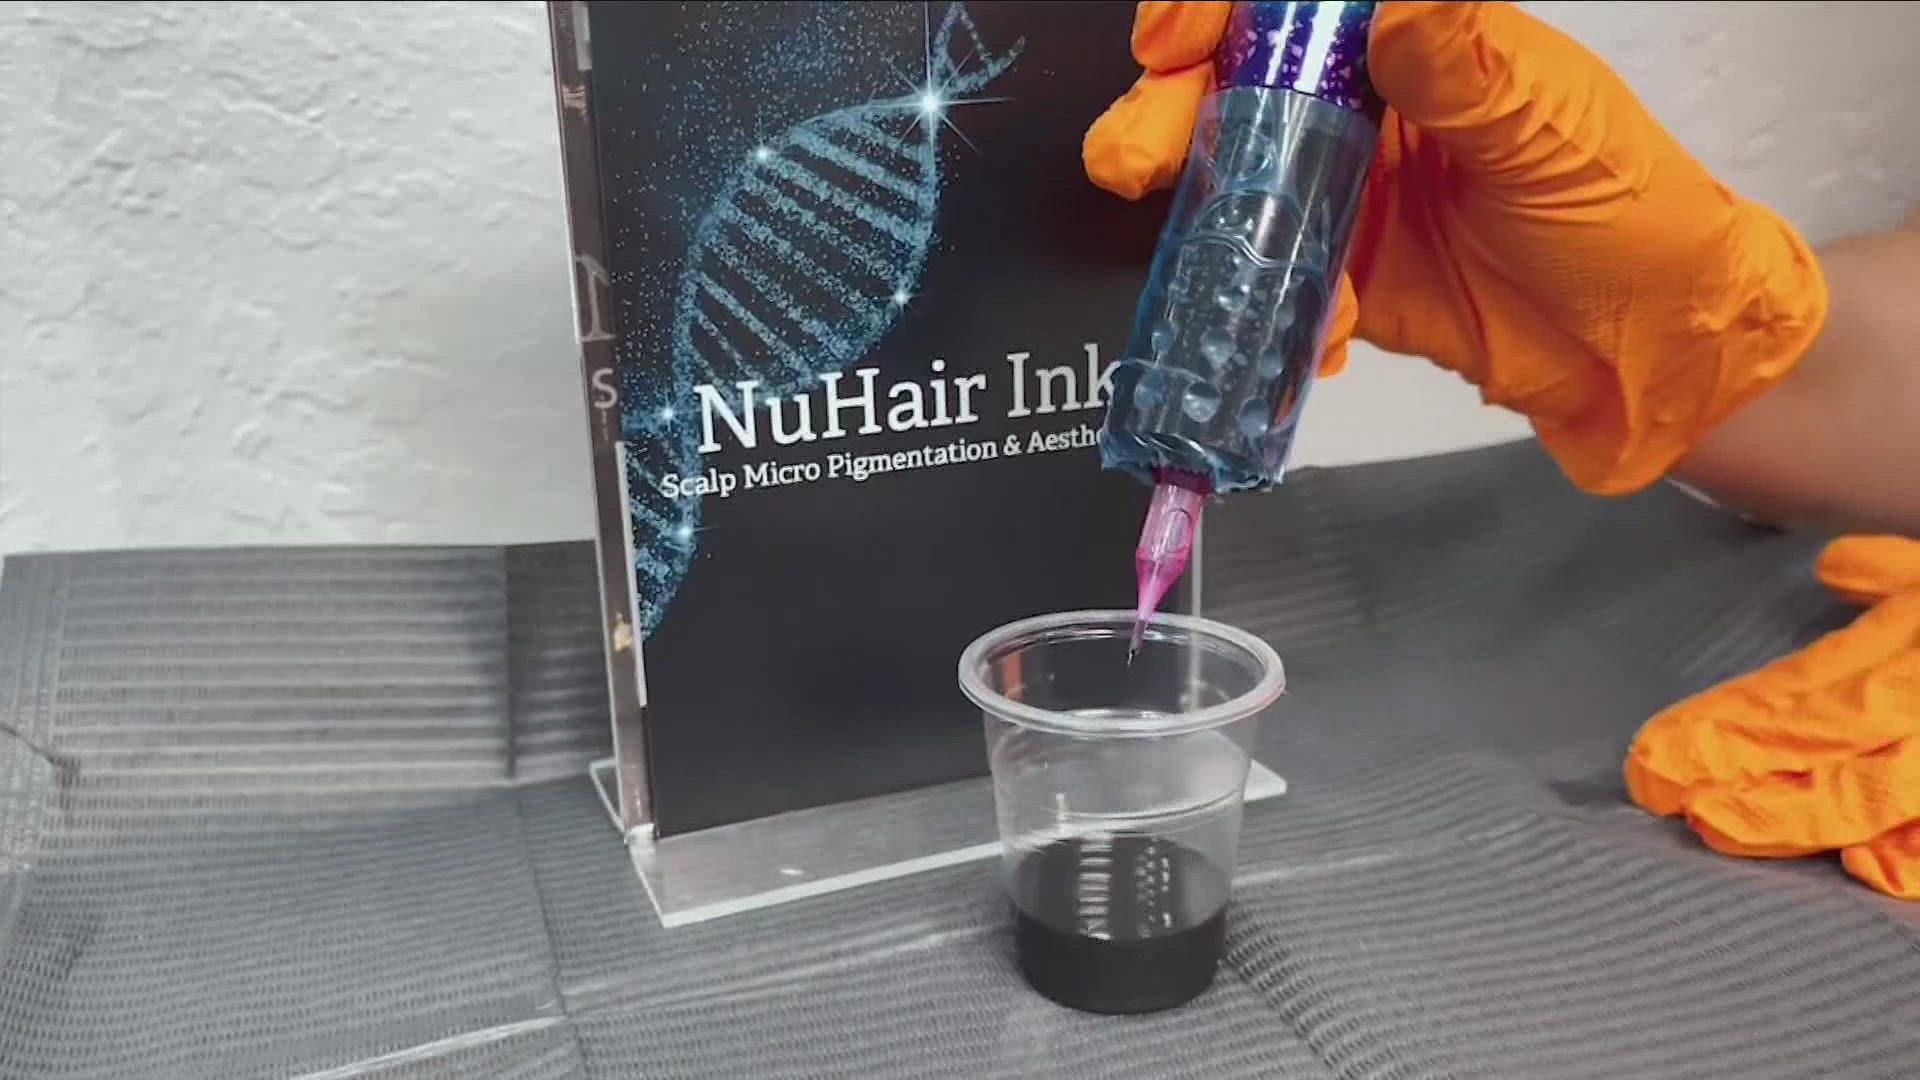 The owner of NuHair Ink says he was inspired by those who are fighting cancer and dealing with hair loss.